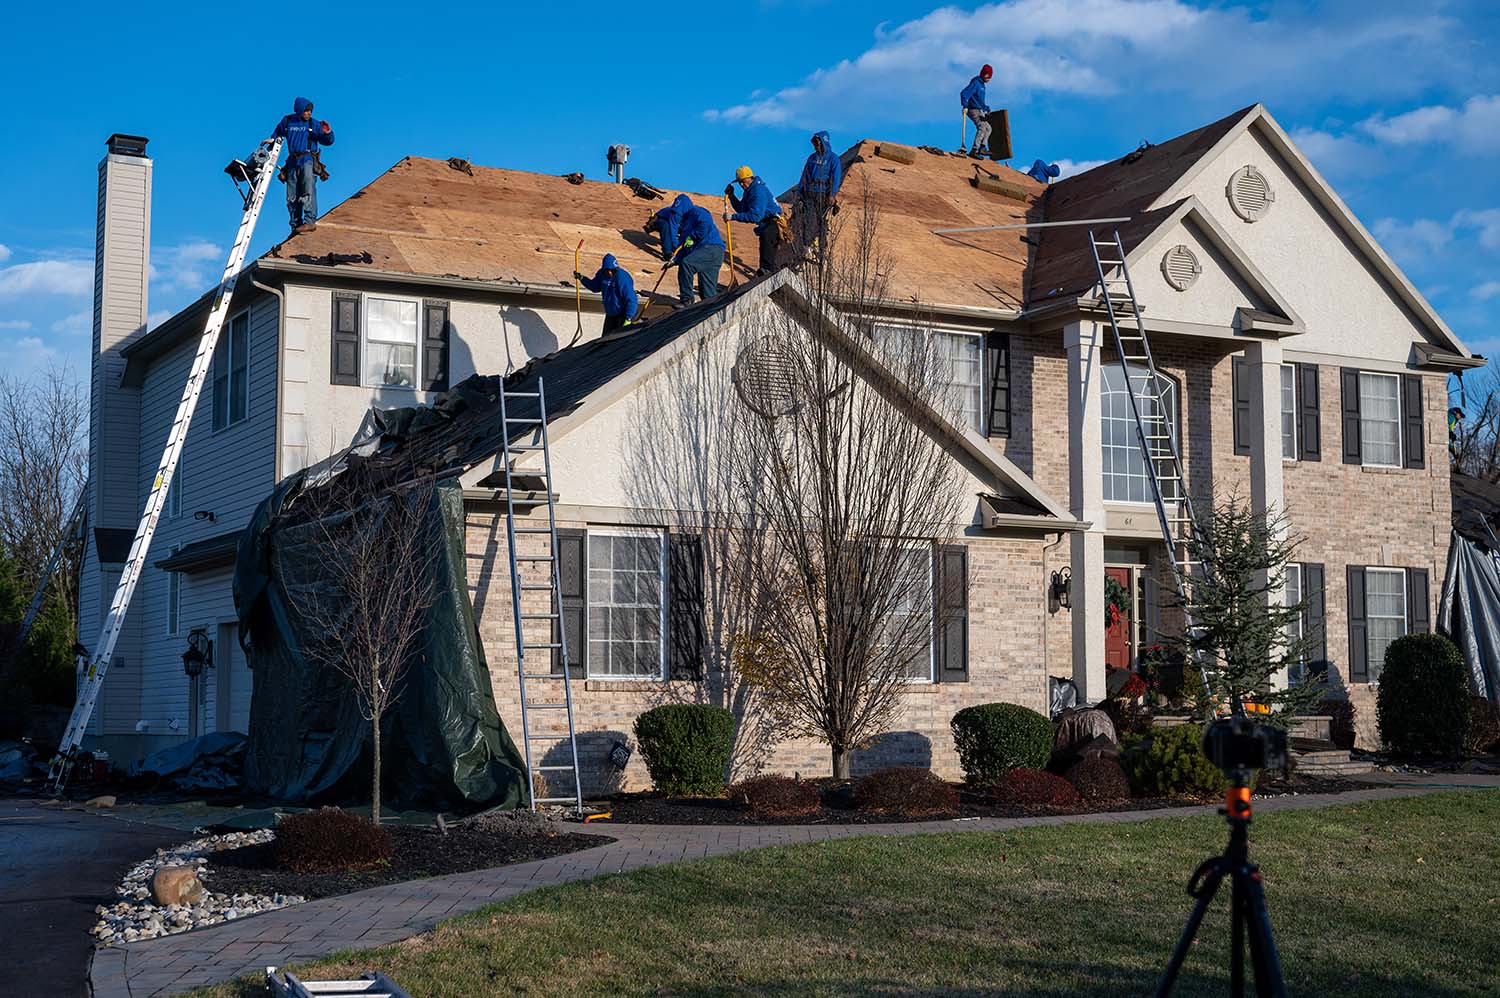 Roofing repair company - residential roofing contractors (medium image)